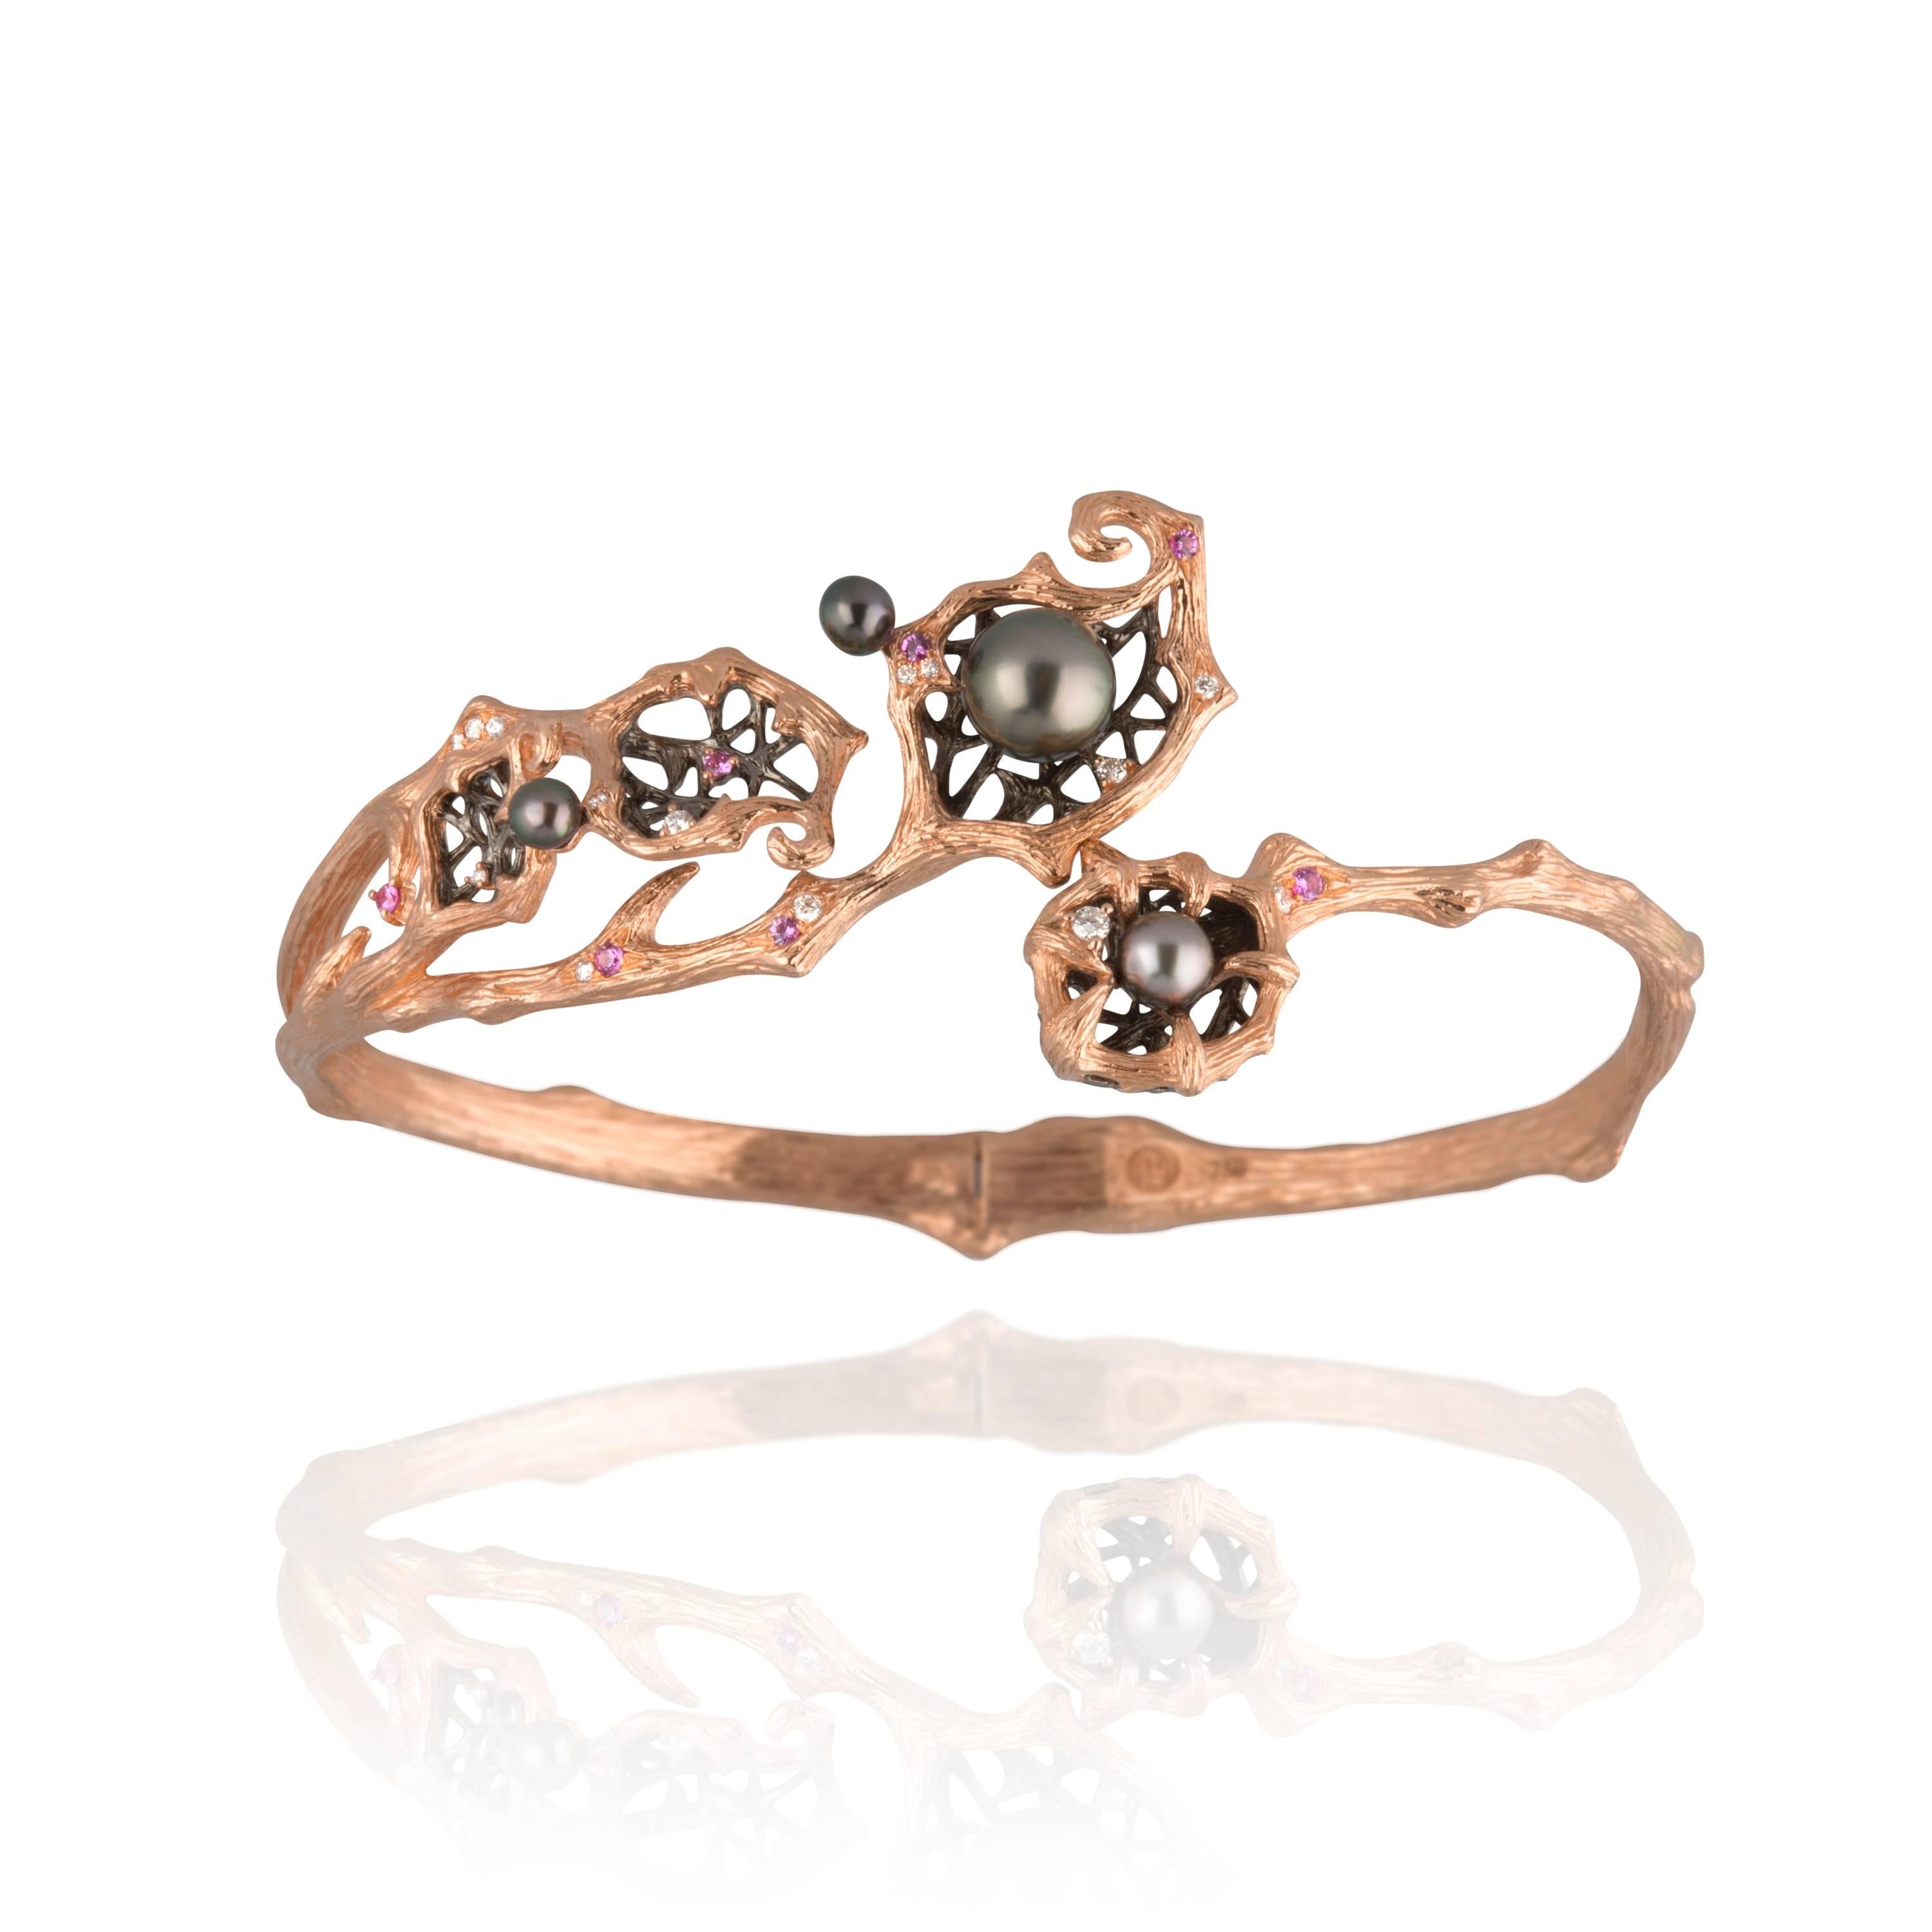 Inlaid with pink sapphires and diamonds, this 18K rose gold bangle unfurls around its wearer's wrist, delicately holding in place rare south sea keshi pearls like enchanted eggs in a magical nest. This glamourous piece with its warm, glowing hues